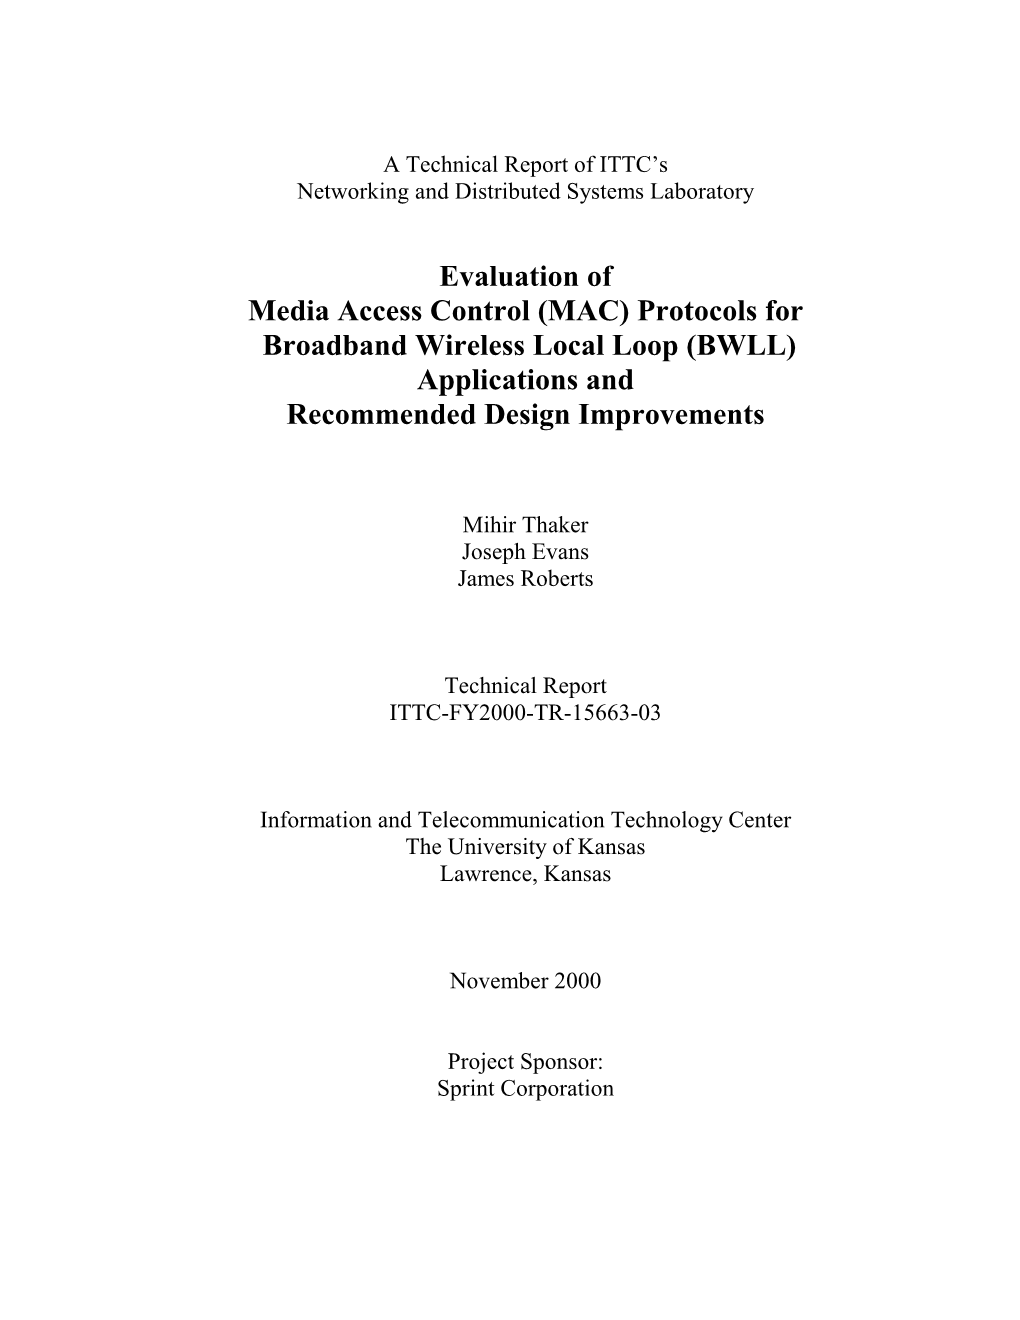 MAC) Protocols for Broadband Wireless Local Loop (BWLL) Applications and Recommended Design Improvements